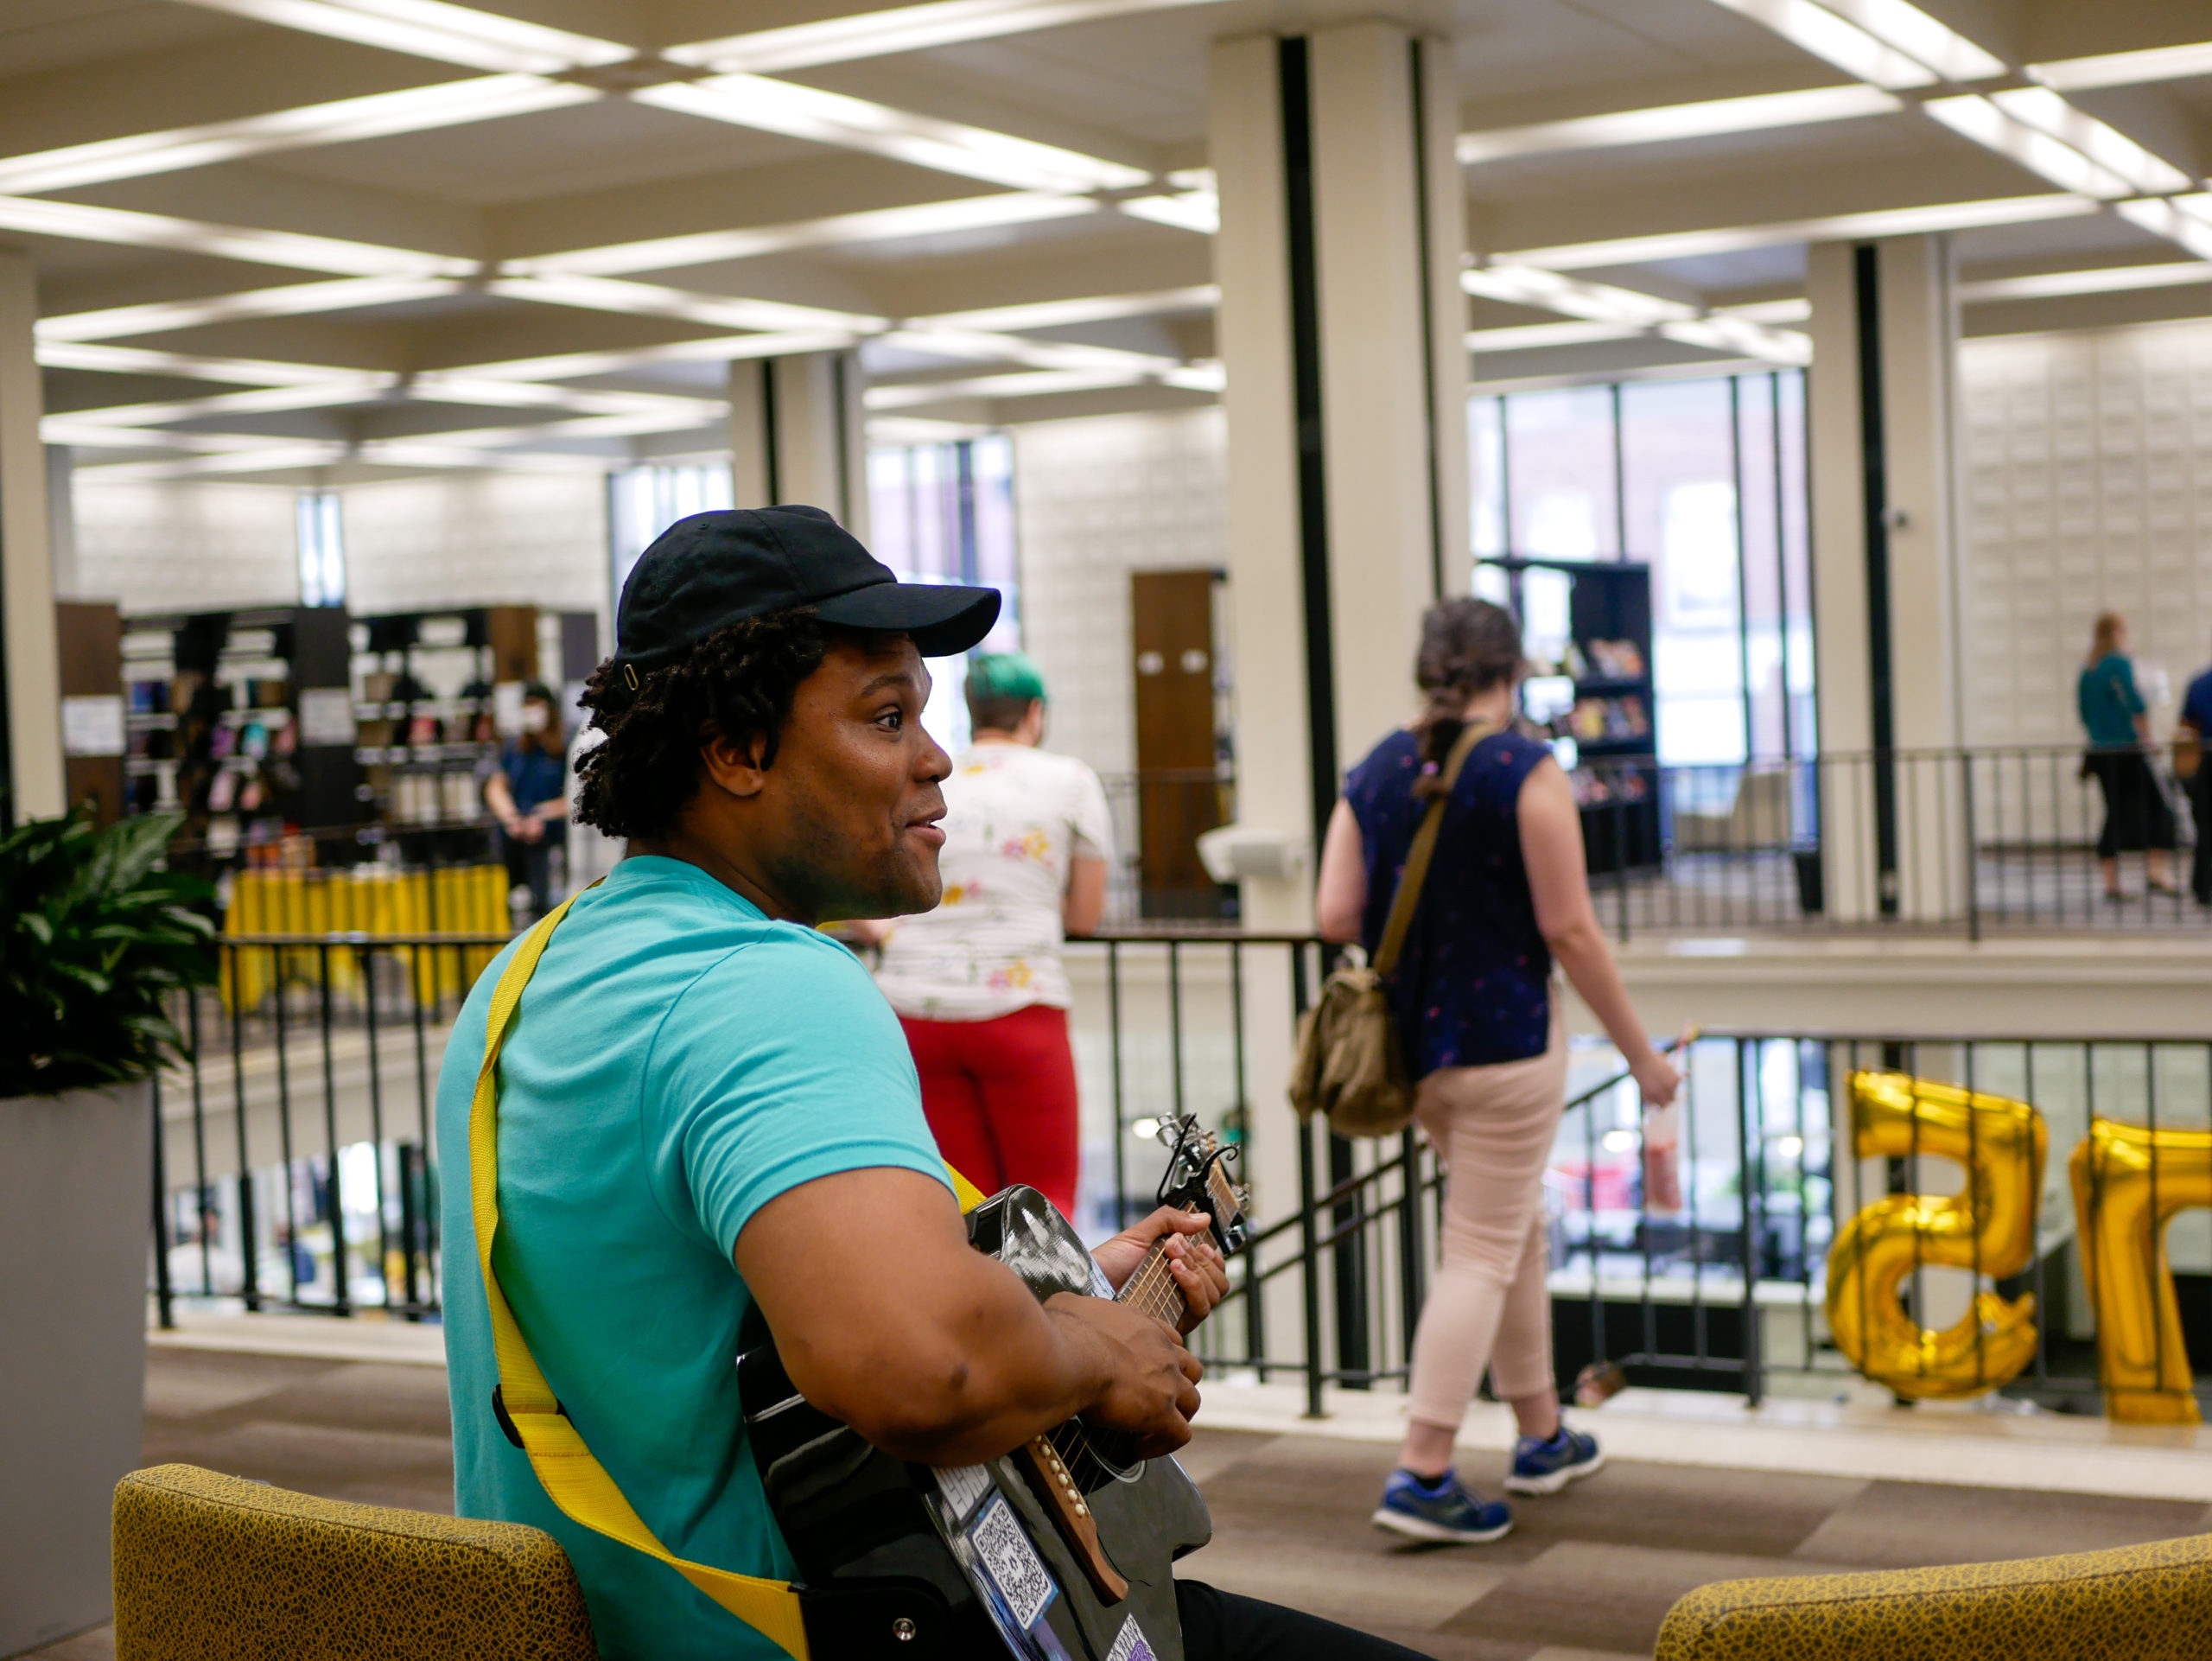 Terrance Banks aka Soultru performs at the Davenport Public Library in downtown Davenport.